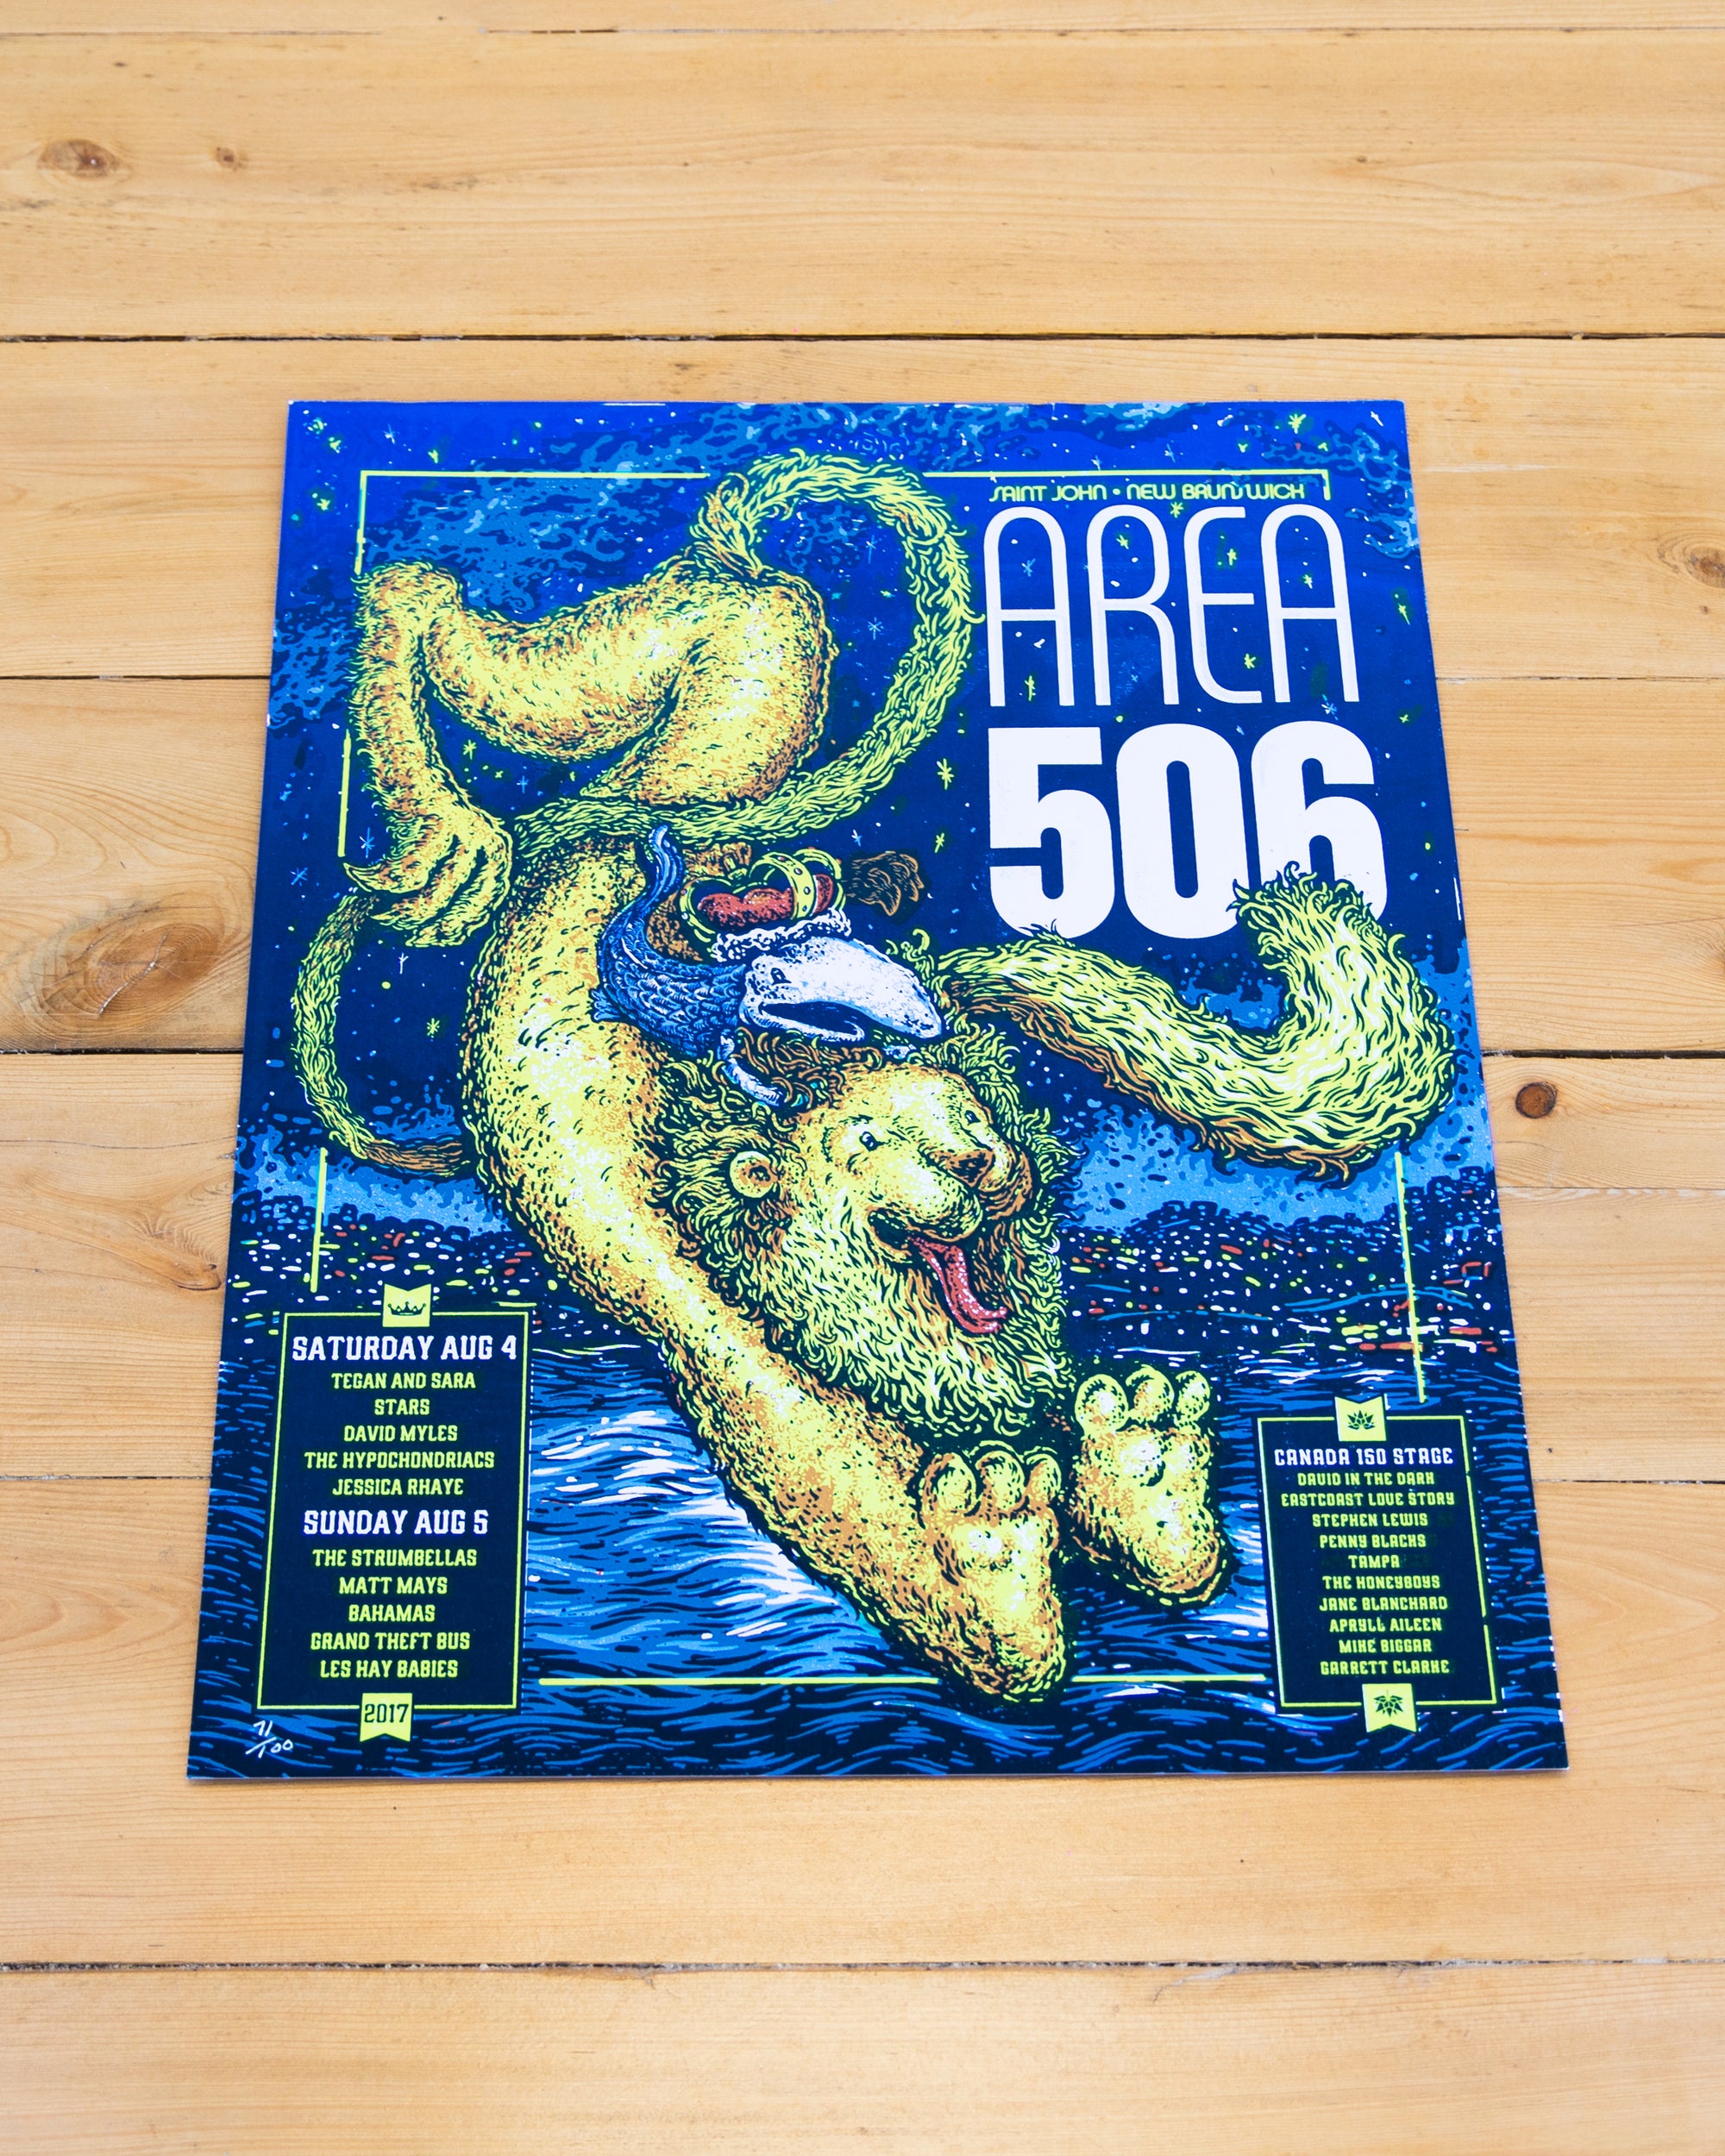 Dark blue poster with festive waterfront landmarks. Featuring the artist lineup from the 2017 AREA 506 Music Festival- including; Saturday Aug 4; Tegan and Sara, Stars, David Myles, The Hypochondriacs, and Jessica Rhaye. Sunday Aug 5 The Strumbellas, Matt Mays, Bahamas, Grand Theft Bus and Les Hay Babies. Canada 150 Stage; David in the Dark, Eastcoast Love Story, Stephen Lewis, Penny Blacks, Tampa, The Honeyboys, Jane Blanchard, Apryll Aileen, Mike Biggar, and Garrett Clarke.